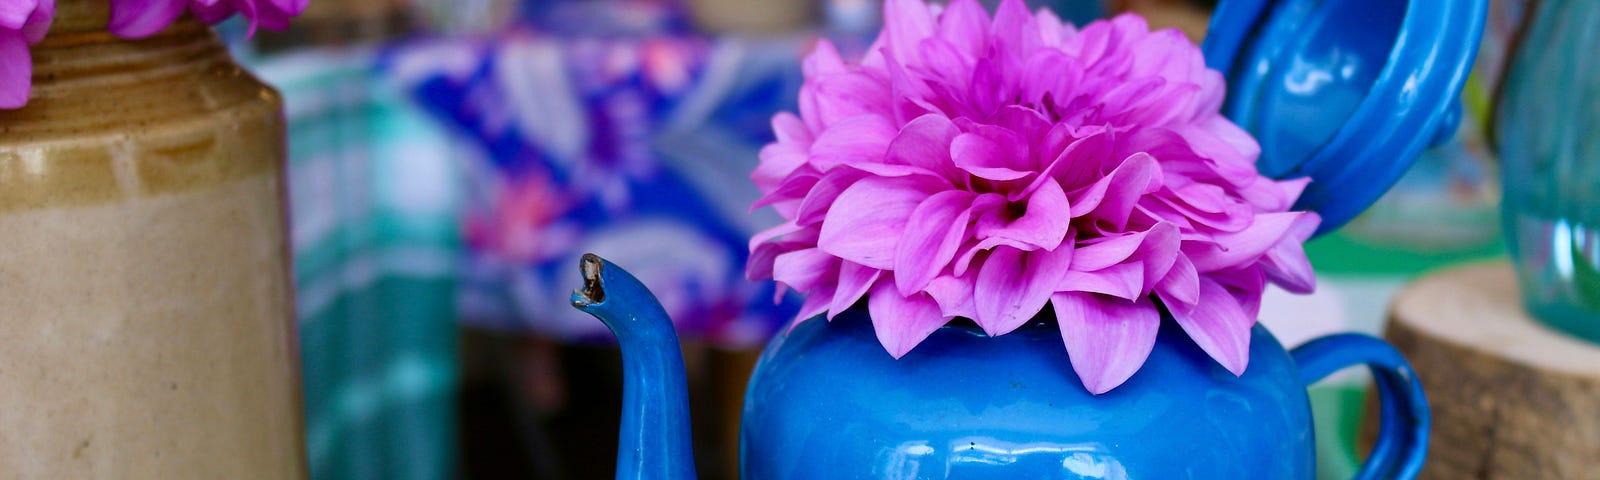 A blue teapot on a table.It reminds of simple joys in life.